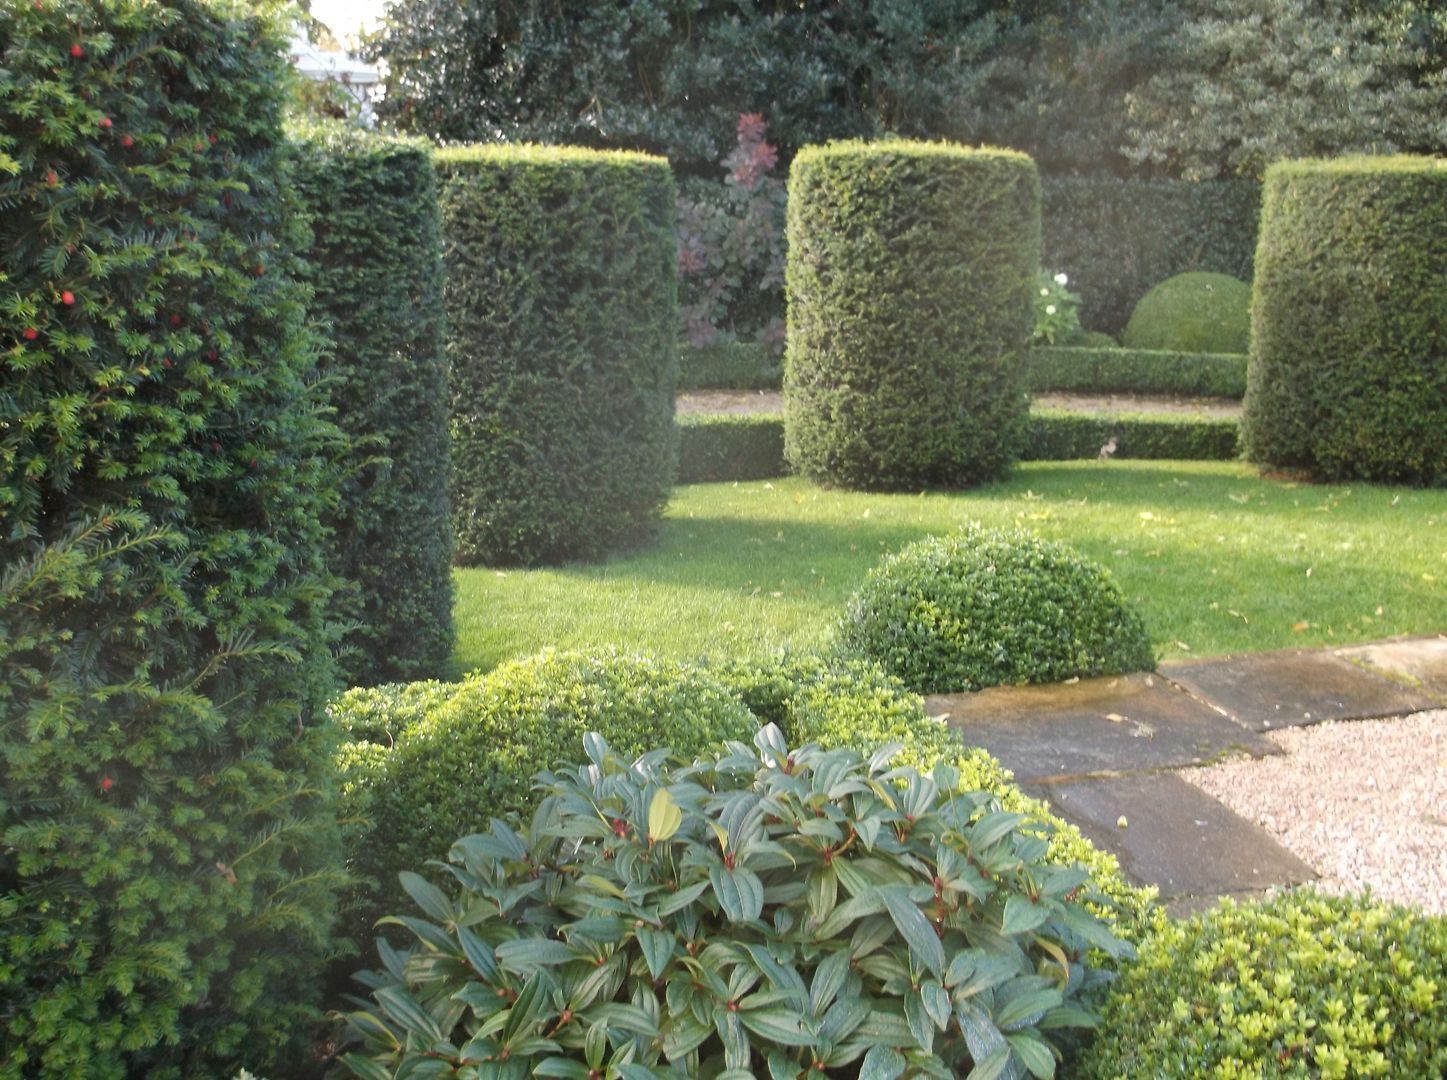 A Bowdon Garden Charlesworth Design Jardines clásicos yew cylinders,topiary,lawns,formalgarden,classicgarden,bowdon,bowdon garden,box balls,terrace